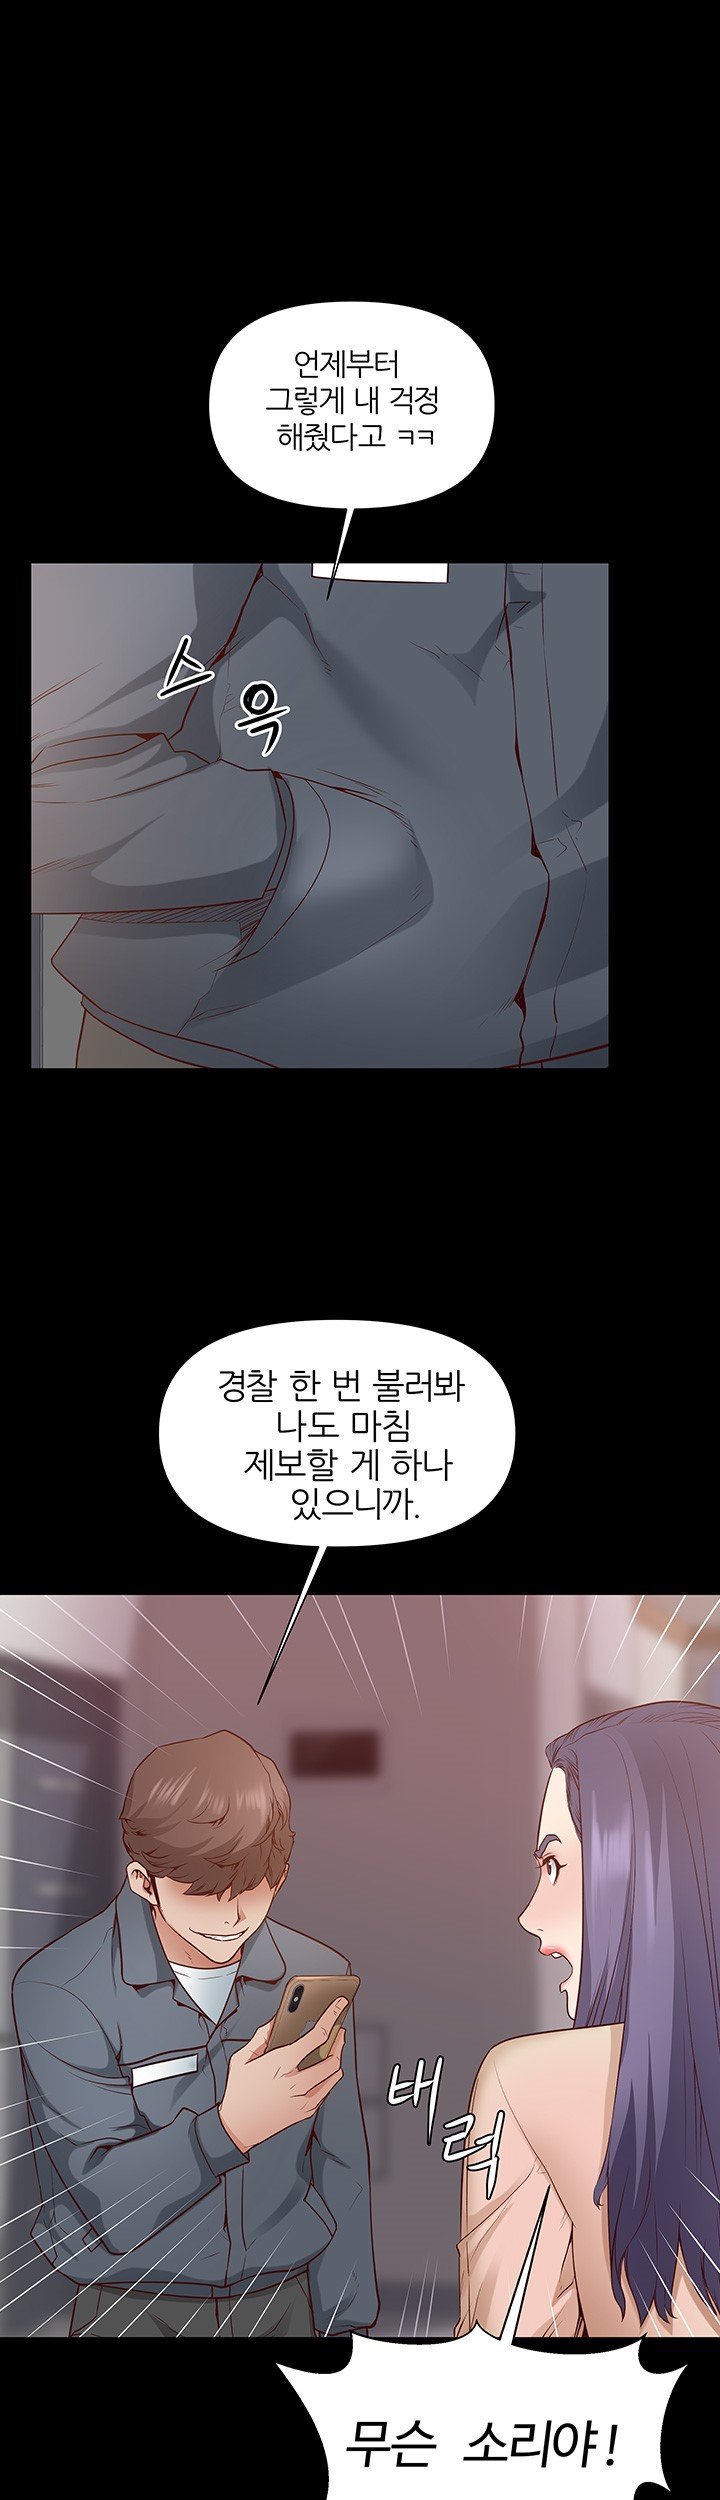 bs-anger-raw-chap-2-14